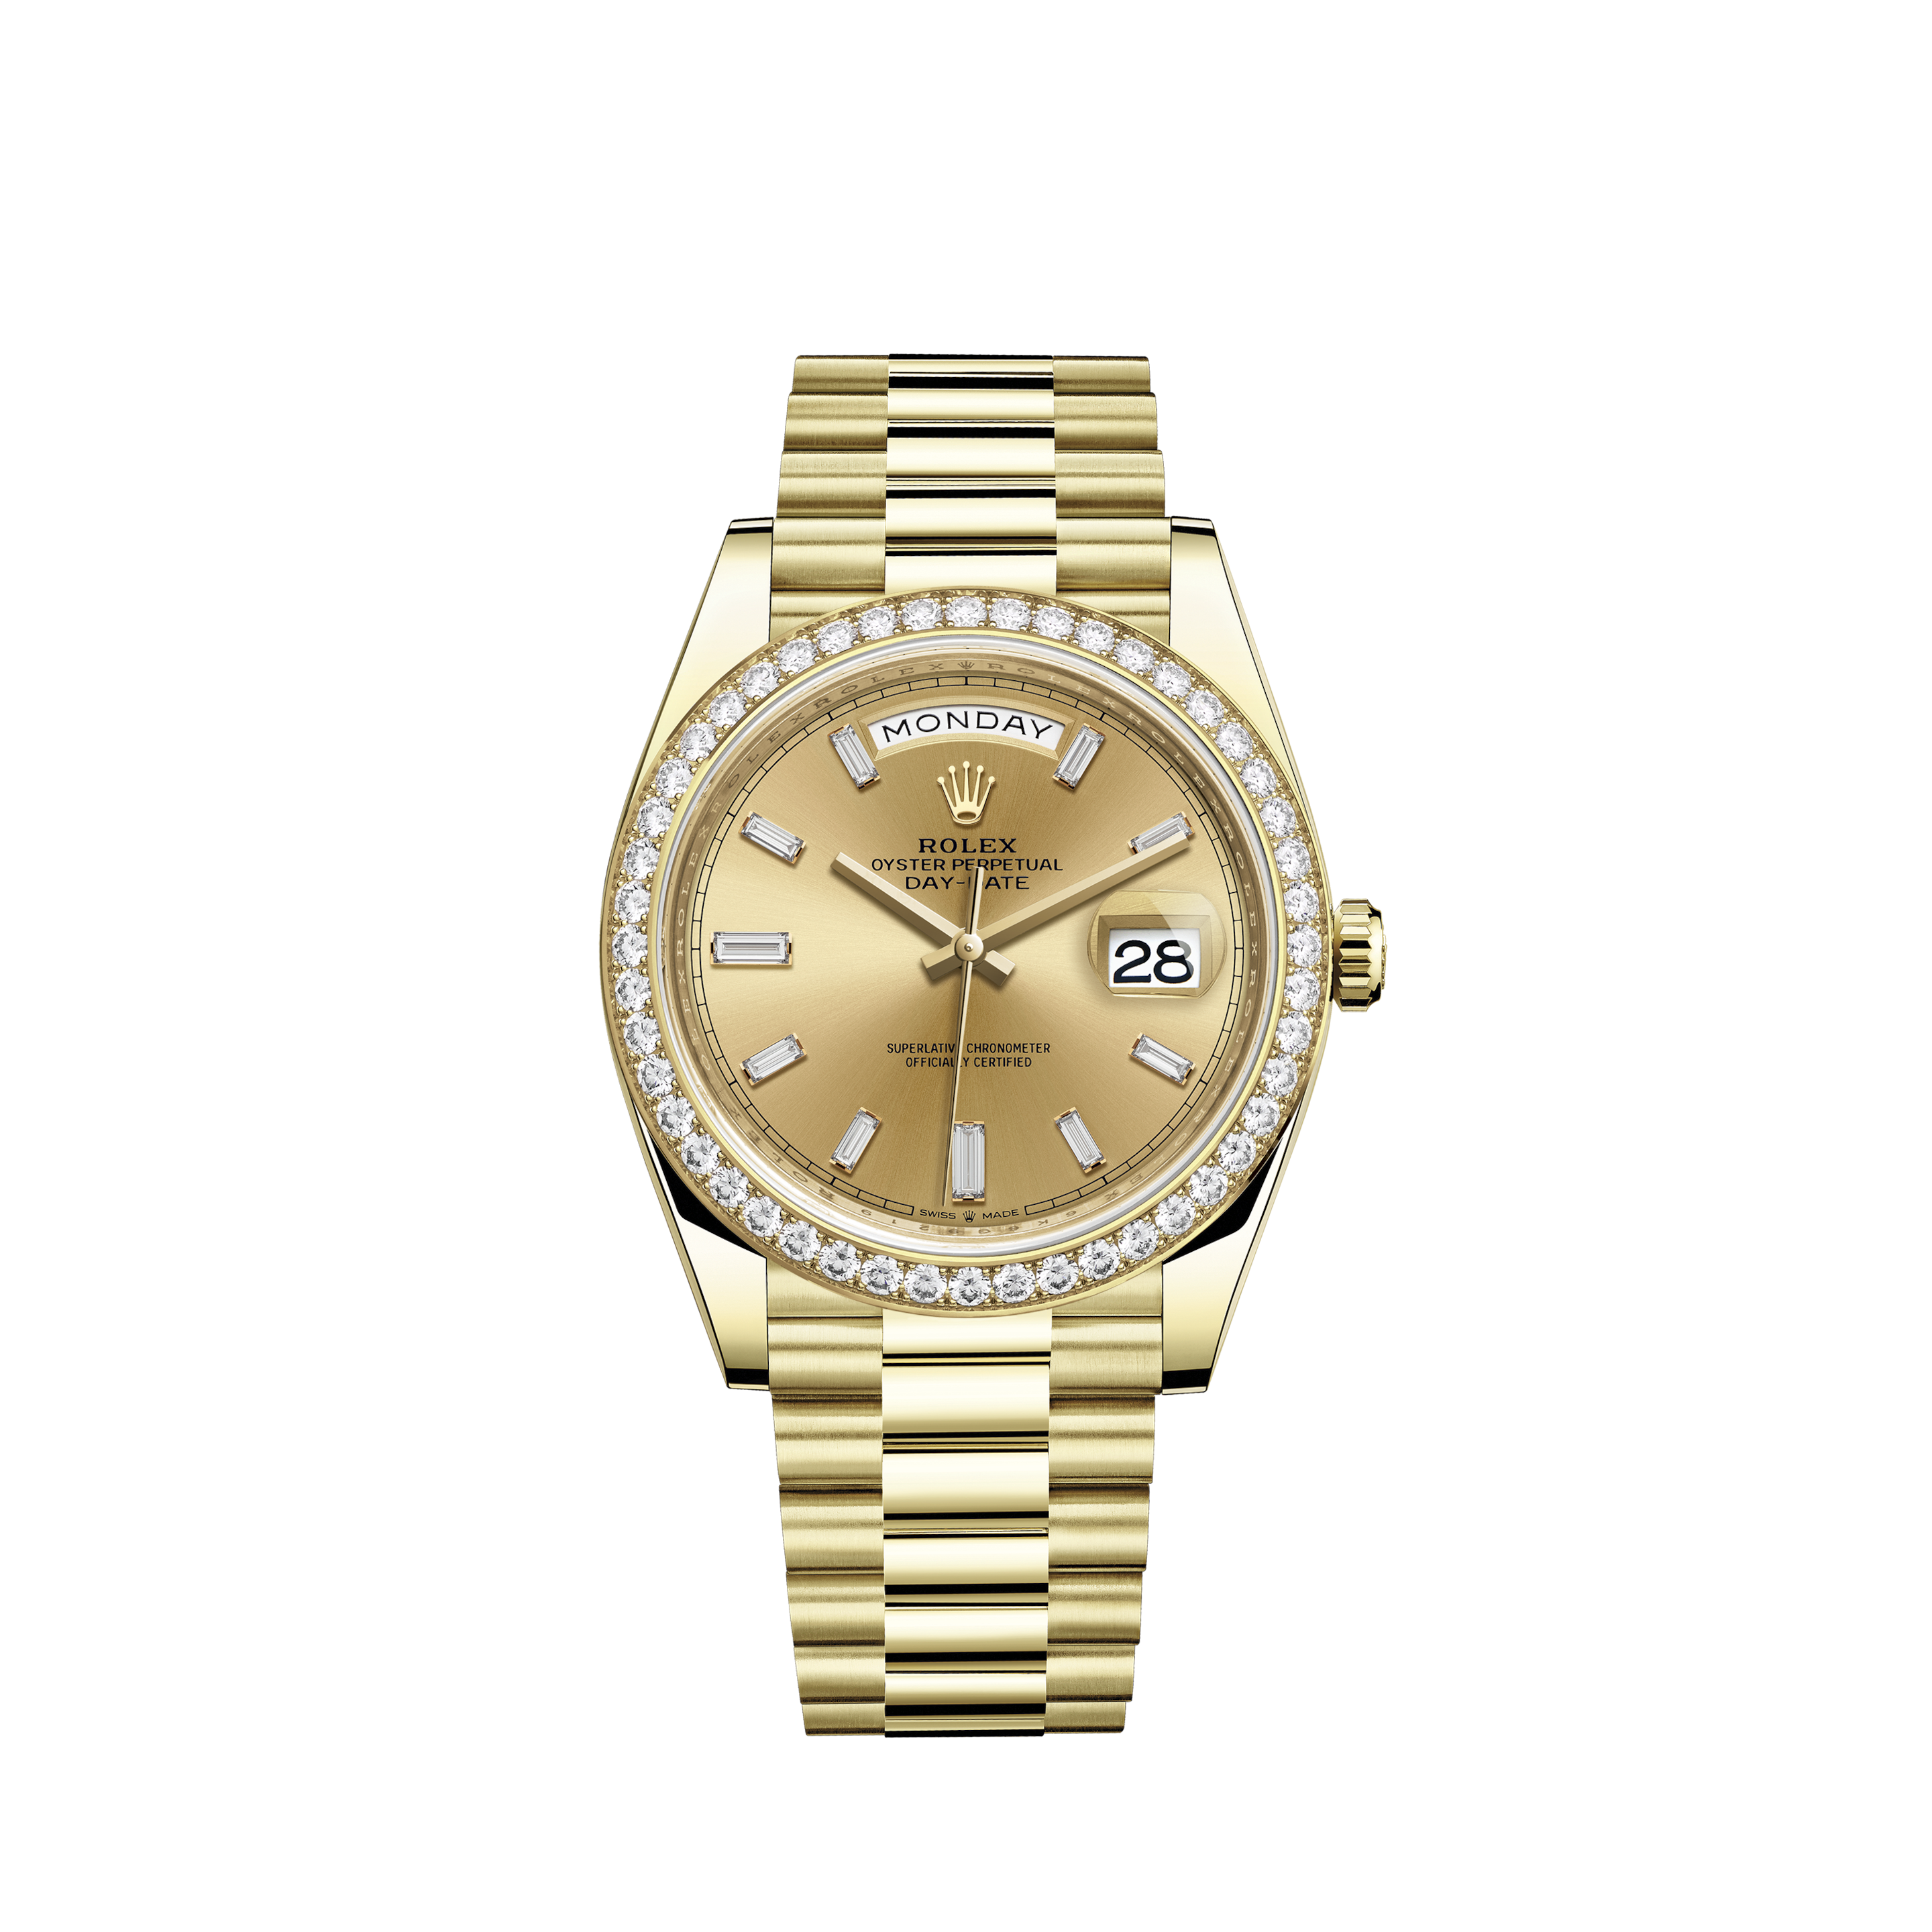 reloj rolex oyster perpetual superlative chronometer officially certified cosmograph